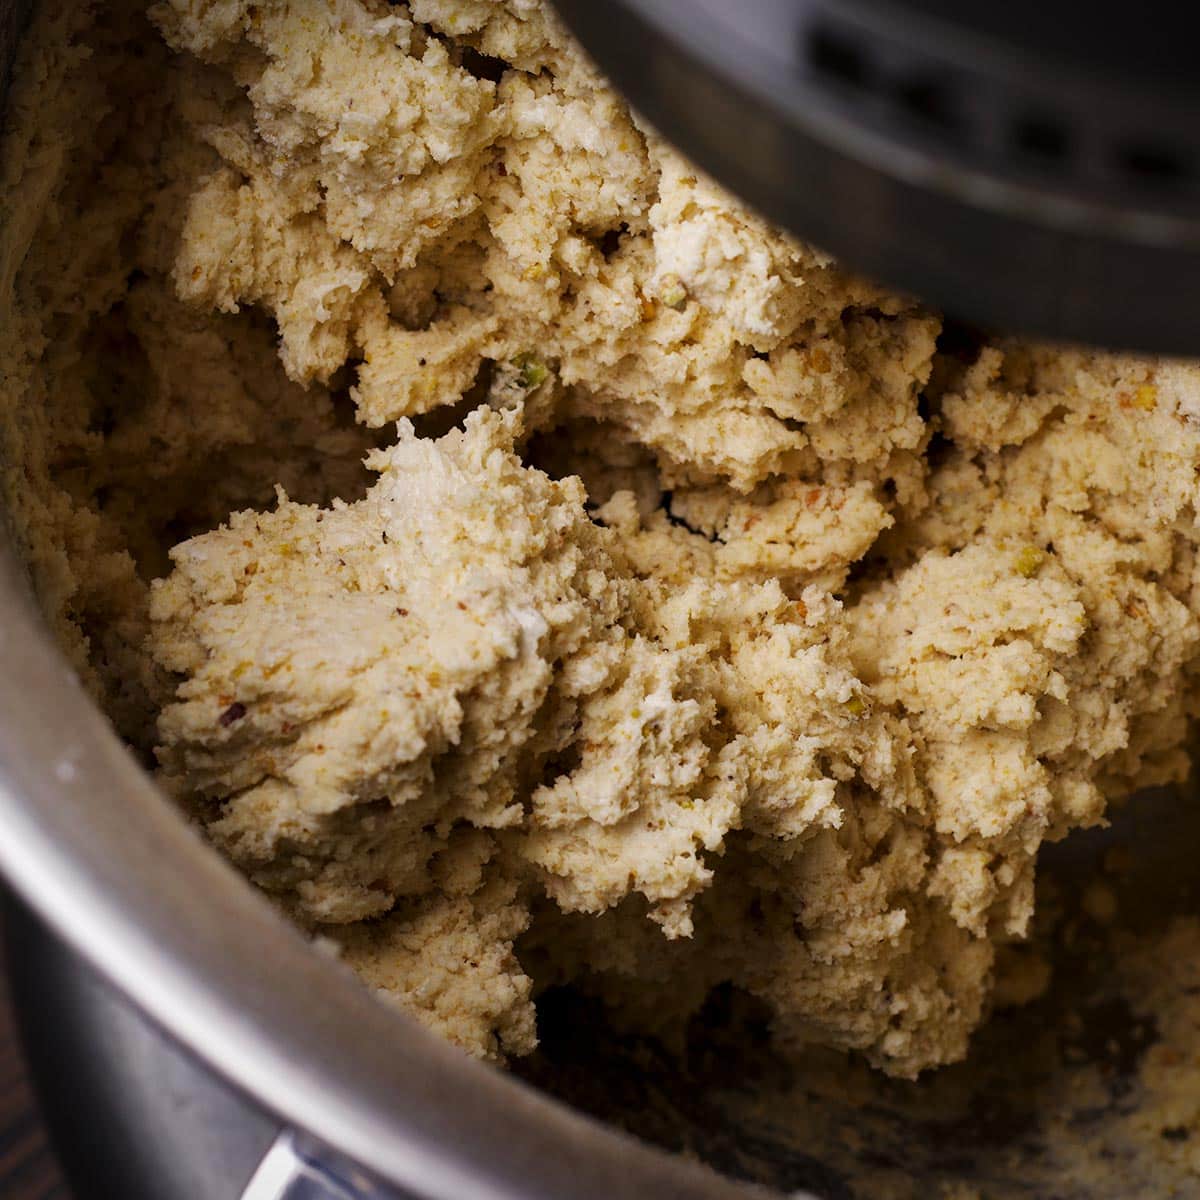 Using an electric mixer to mix flour and ground pistachios into cookie dough.